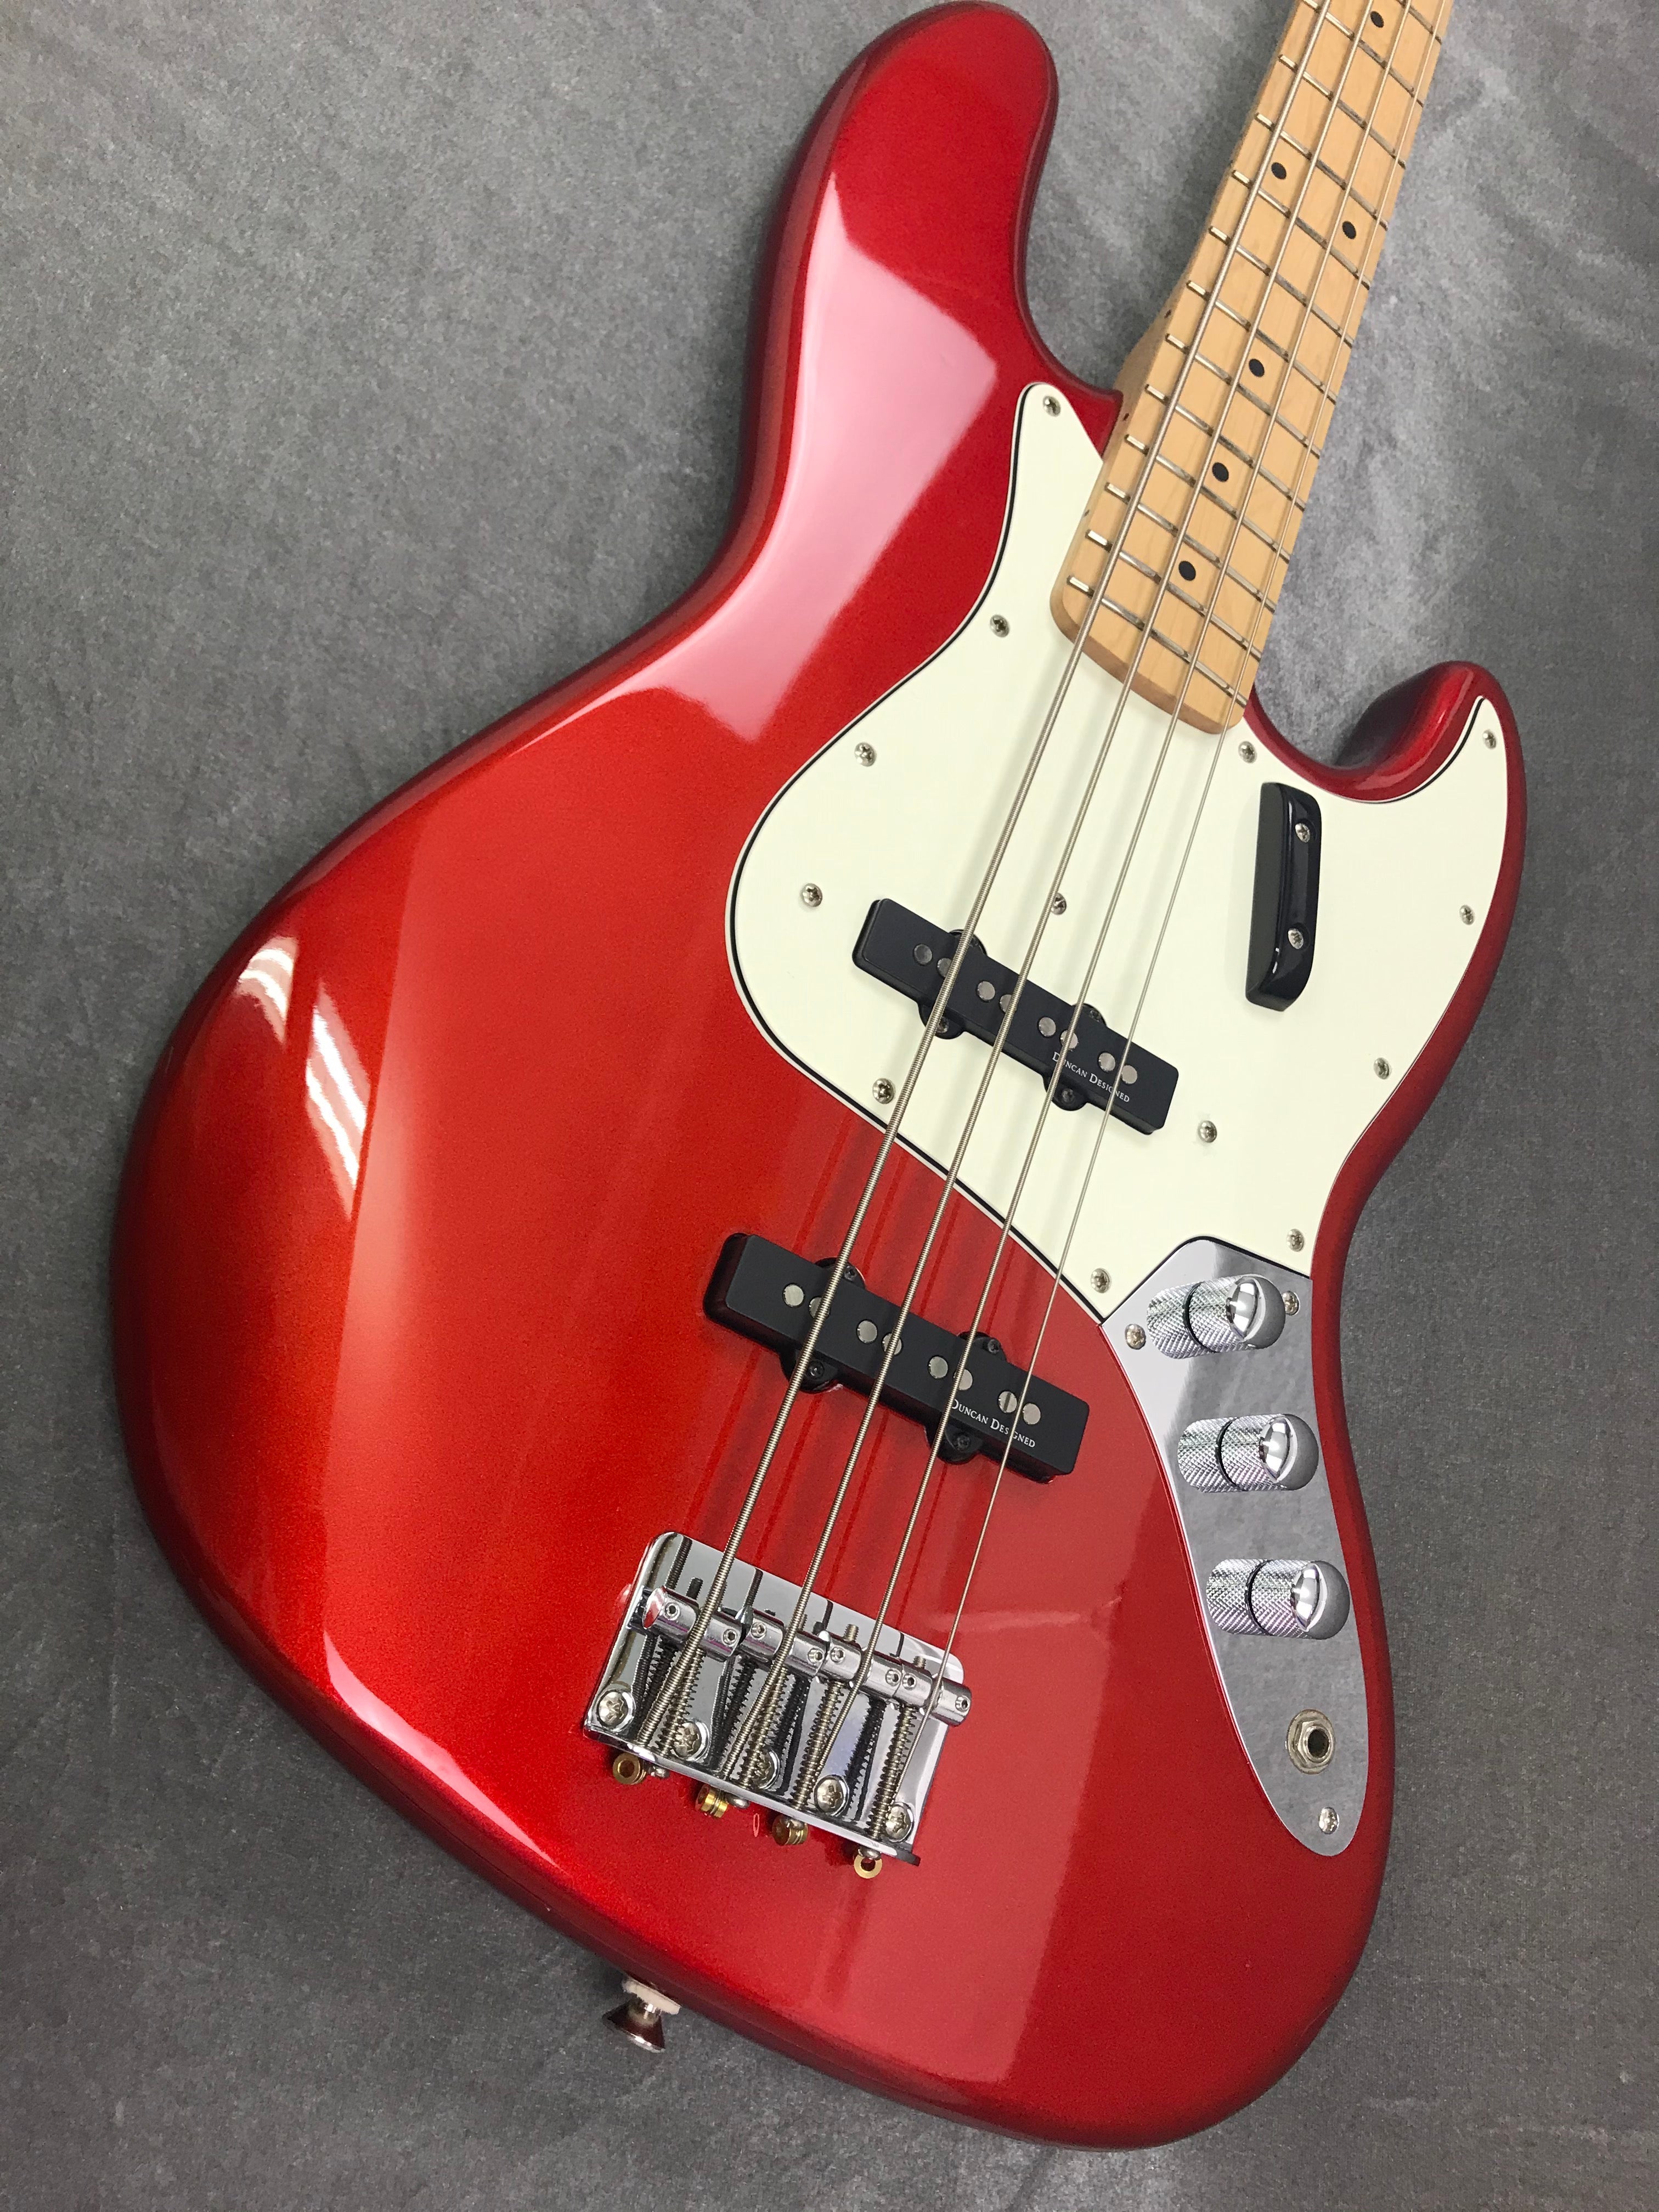 Used Squier by Fender FSR Vintage Modified Jazz Bass Candy Apple Red